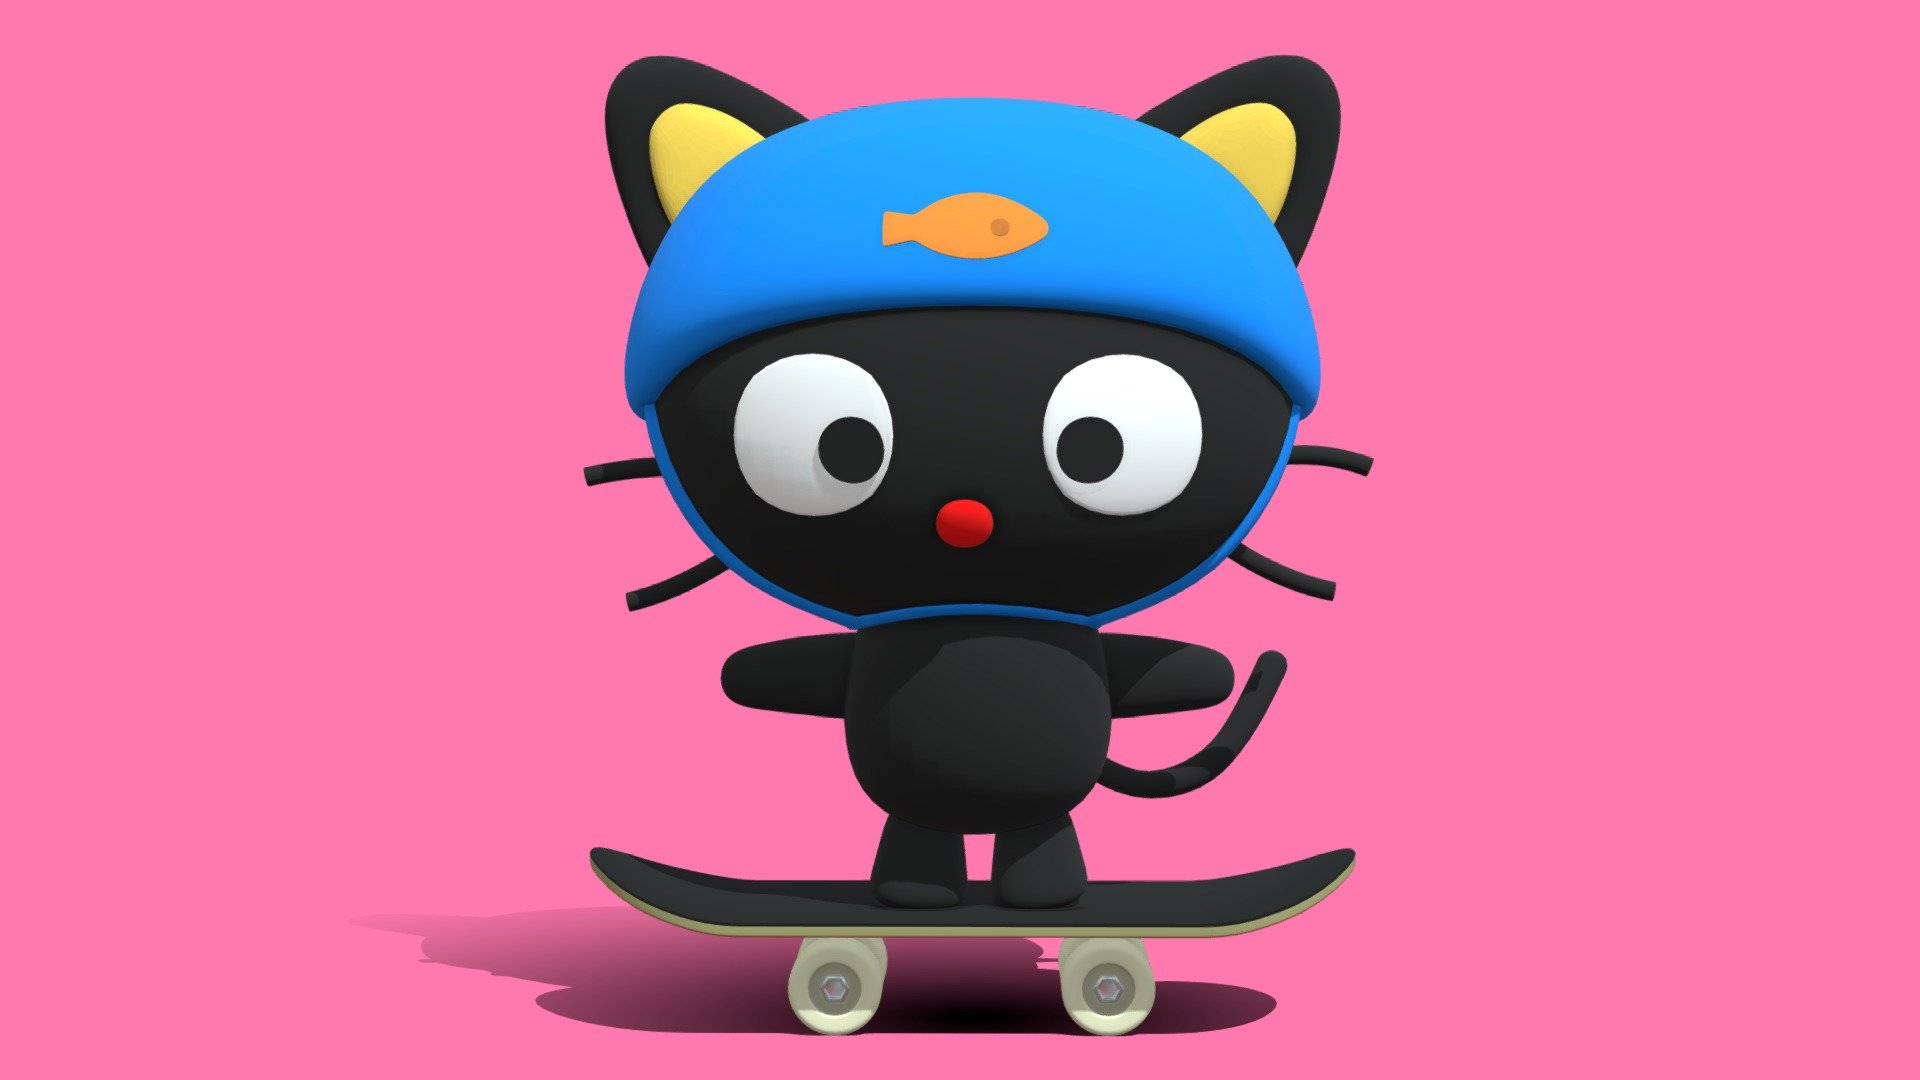 My 3D model of Chococat on a skateboard because he is so cool! I kept the model simple because it is supposed to just be fun and goofy:) - Sanrio Chococat Skateboarding 3D Model - 3D model by SirSquiggles 3d model